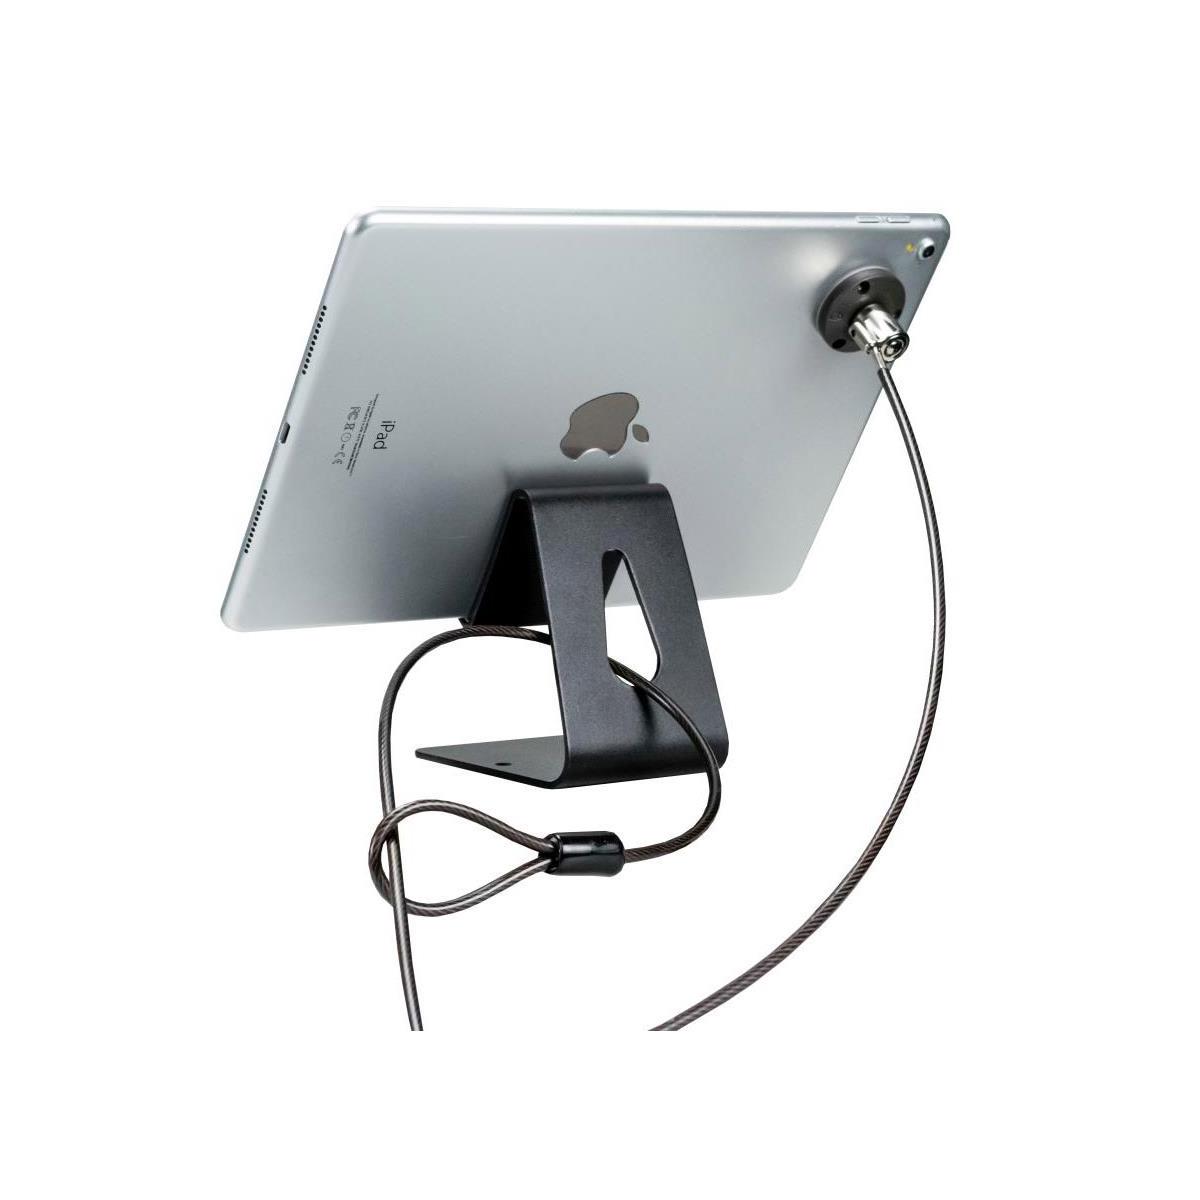 Image of CTA Digital Tablet Desktop Security Kit with Stand &amp; Theft-Deterrent Cable